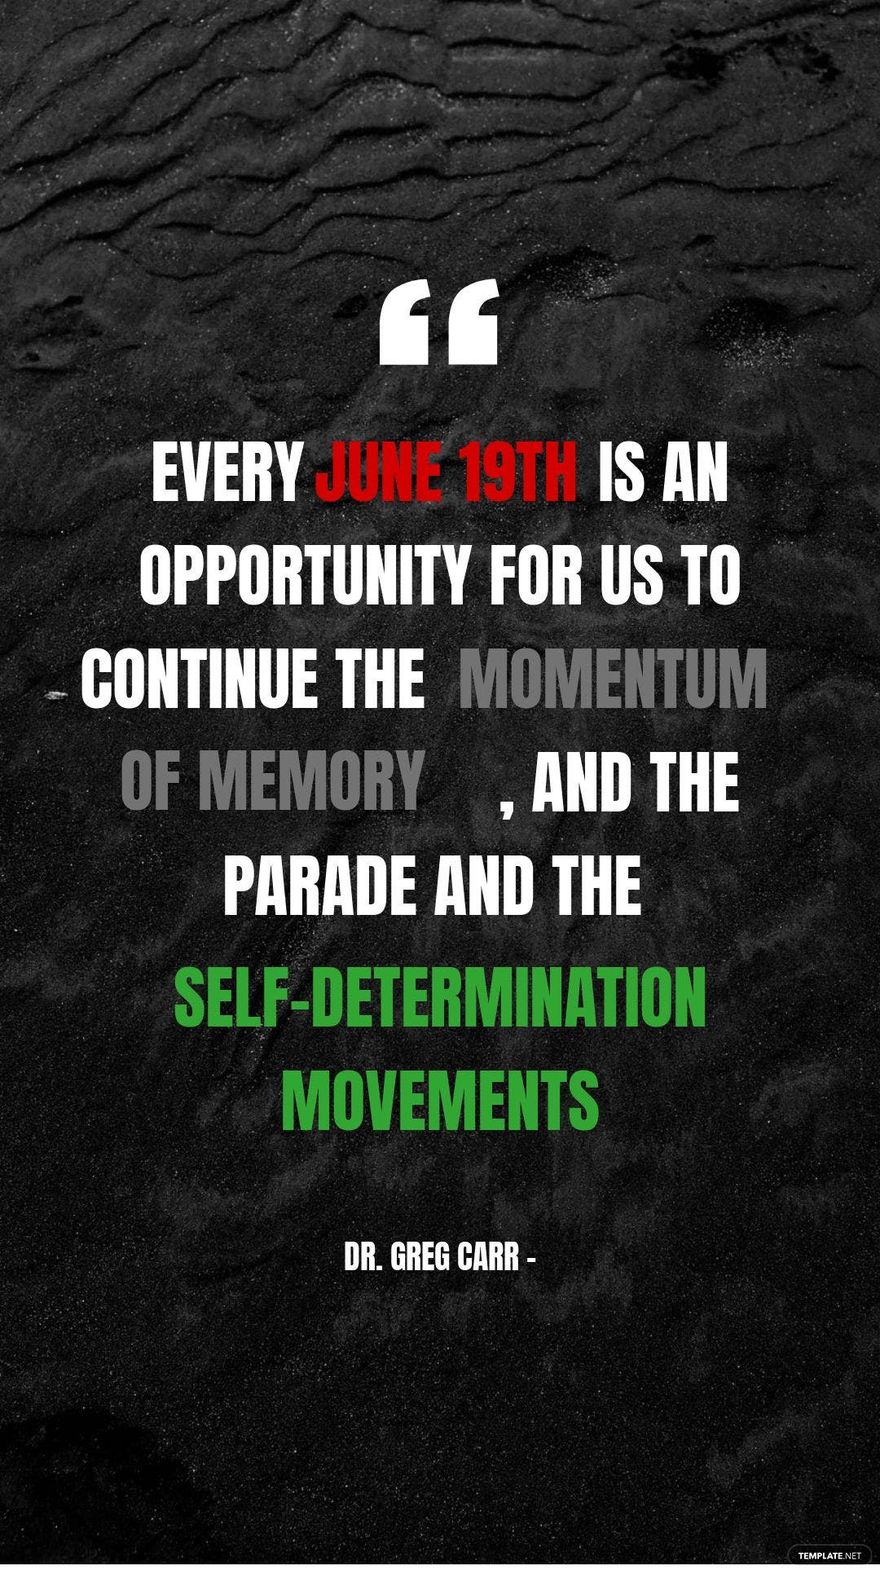 Free Dr. Greg Carr - Every June 19th is an opportunity for us to continue the momentum of memory, and the parade and the self-determination movements. in JPG